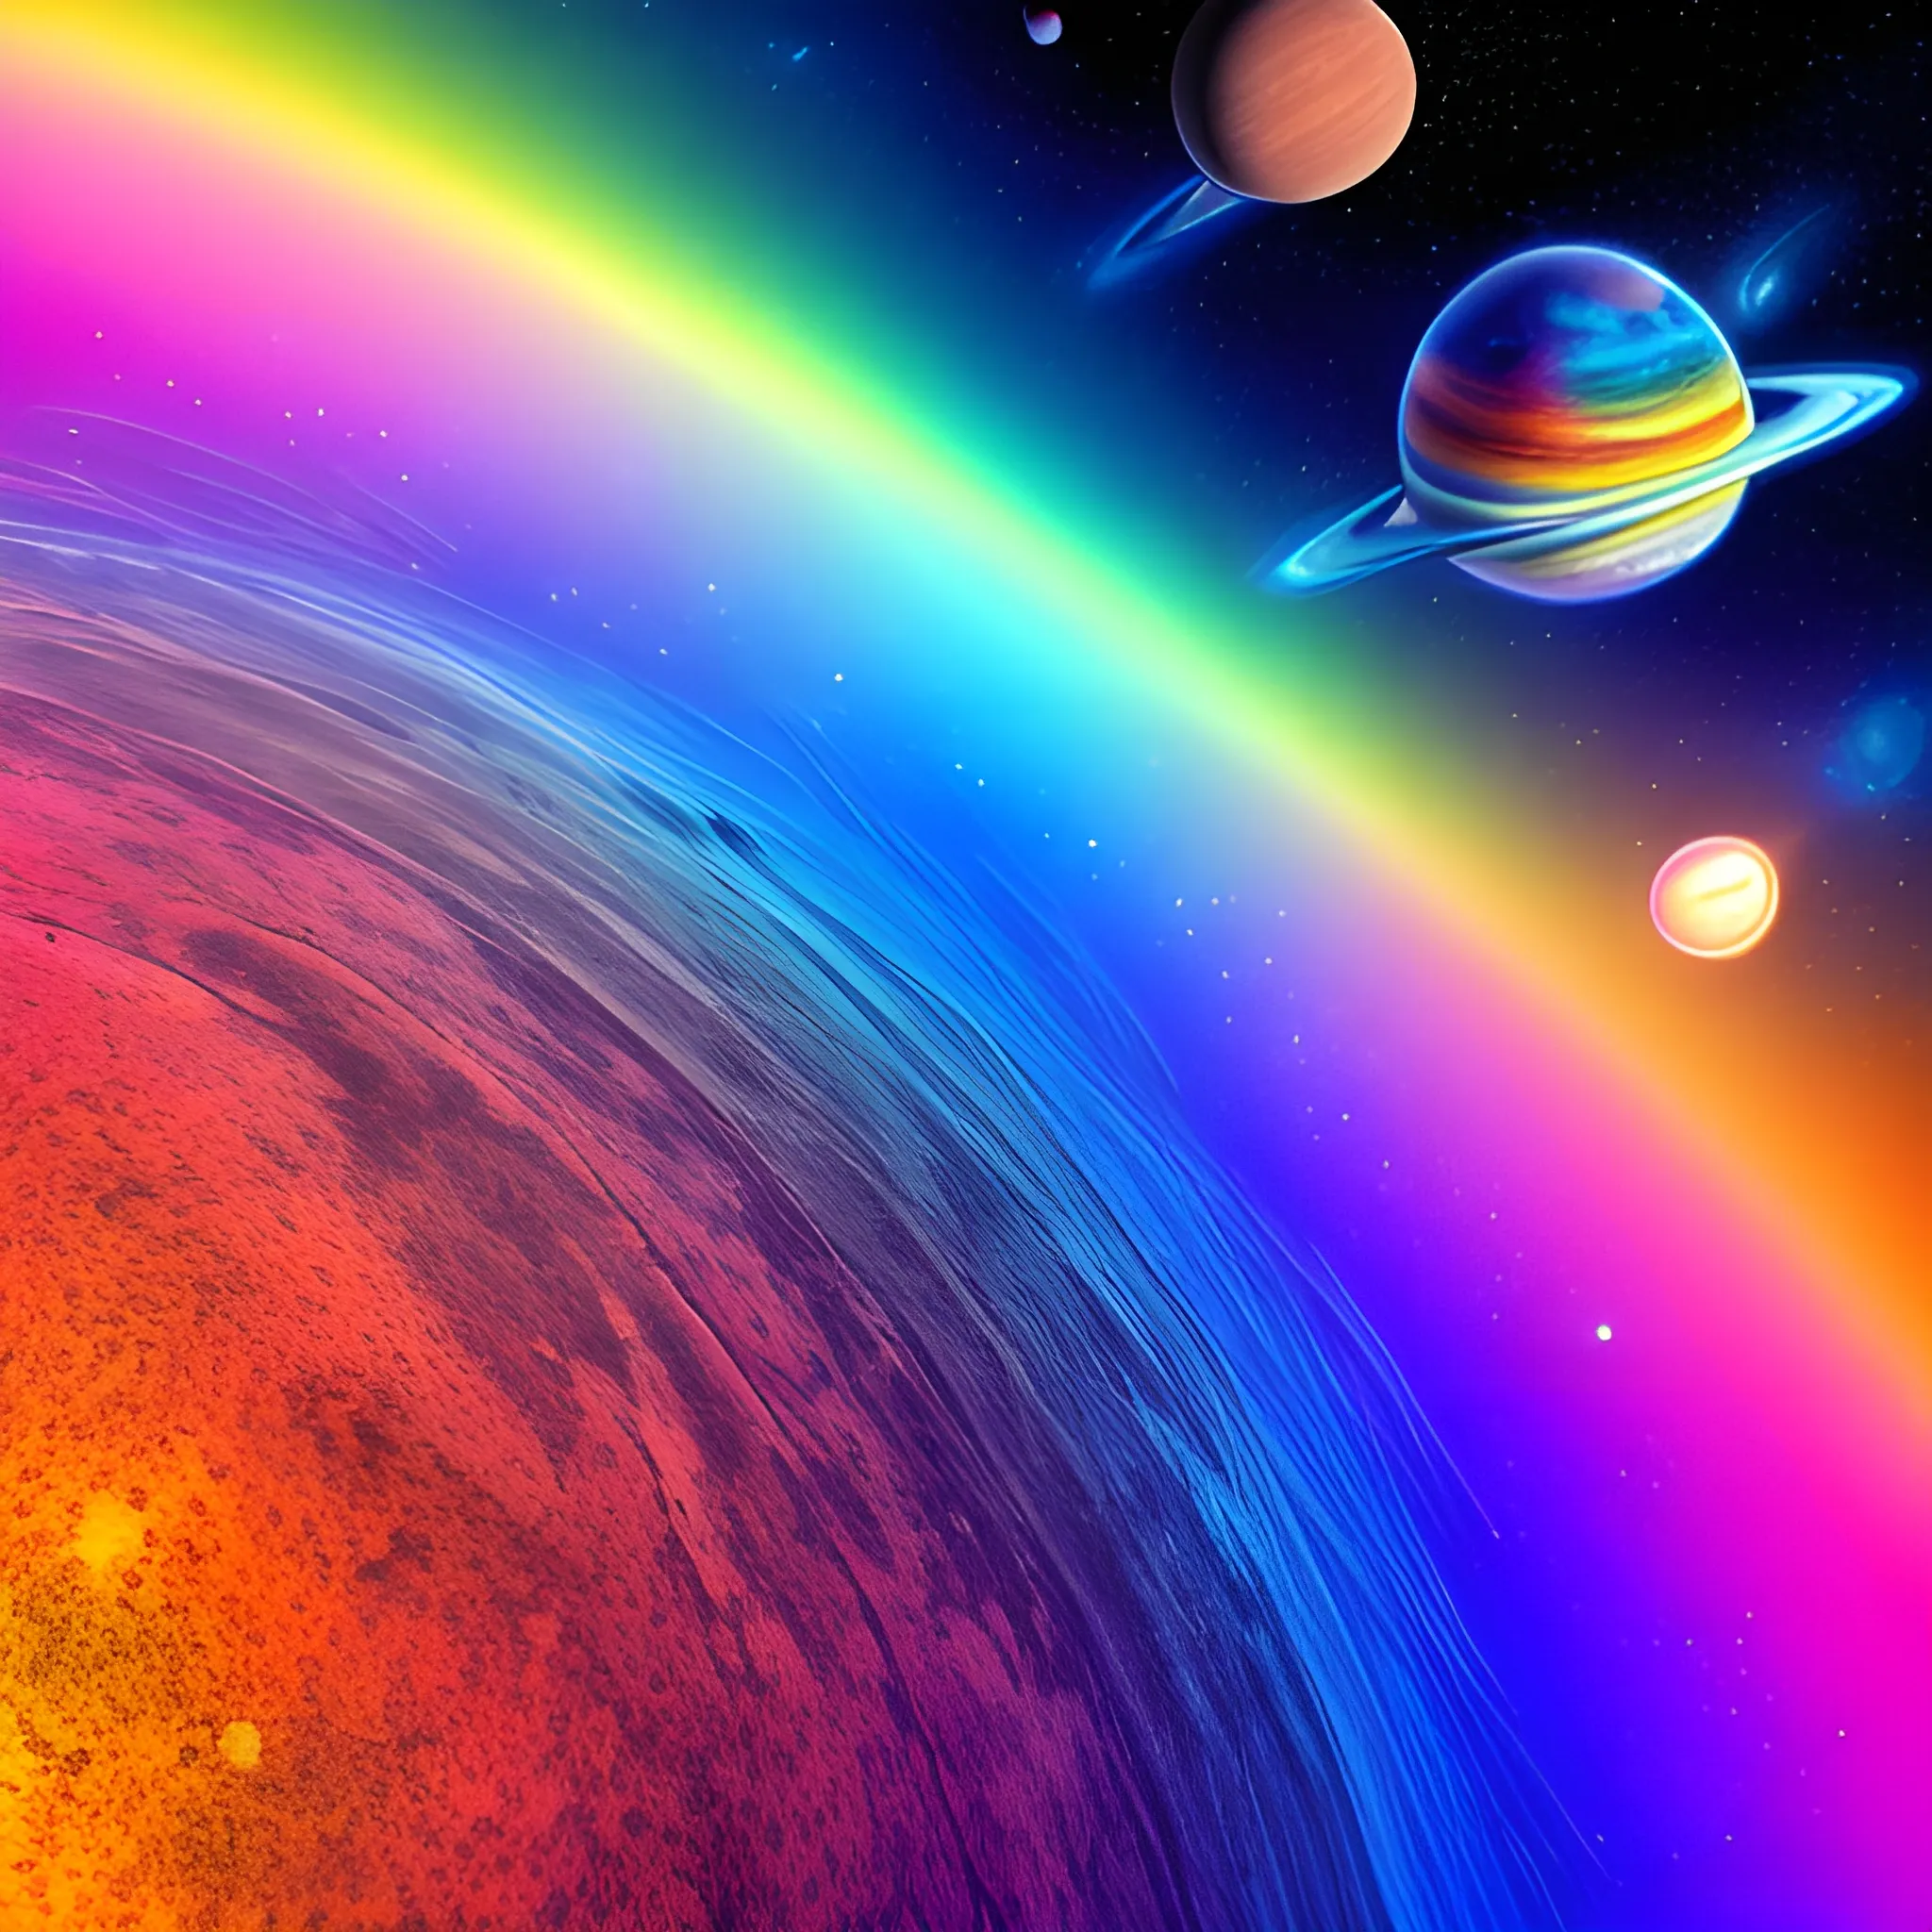 A space planet view with colorful nature, rainbow colors, mirage, hd, fov 100, ultra hd, 8k, happy, progressive, no words